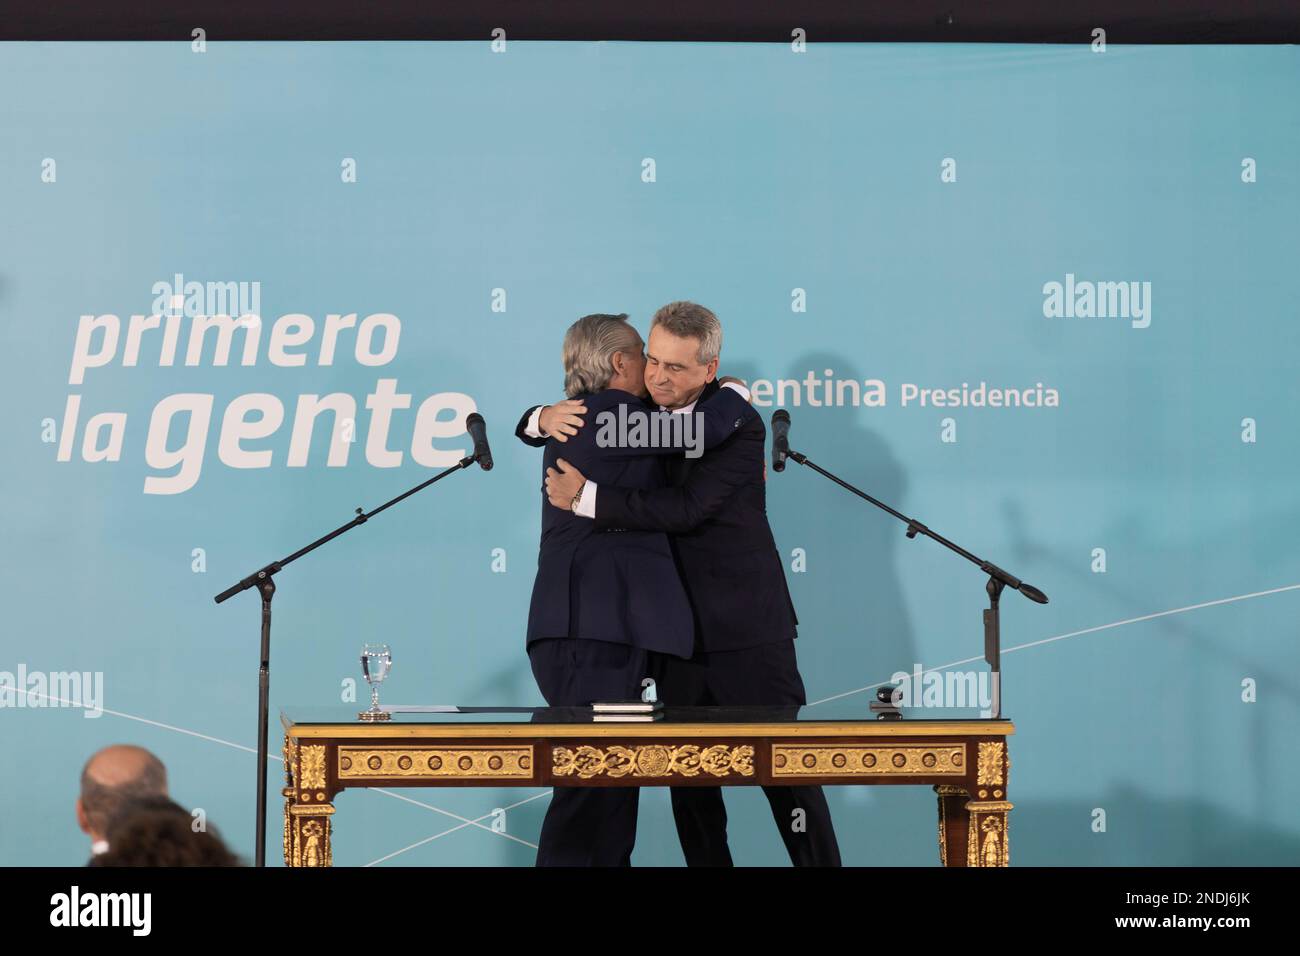 Buenos Aires, Argentina. 15th February, 2023. The President of the Nation Alberto Fernandez swore in the new Chief of Ministers of the Nation Agustín Rossi. Stock Photo